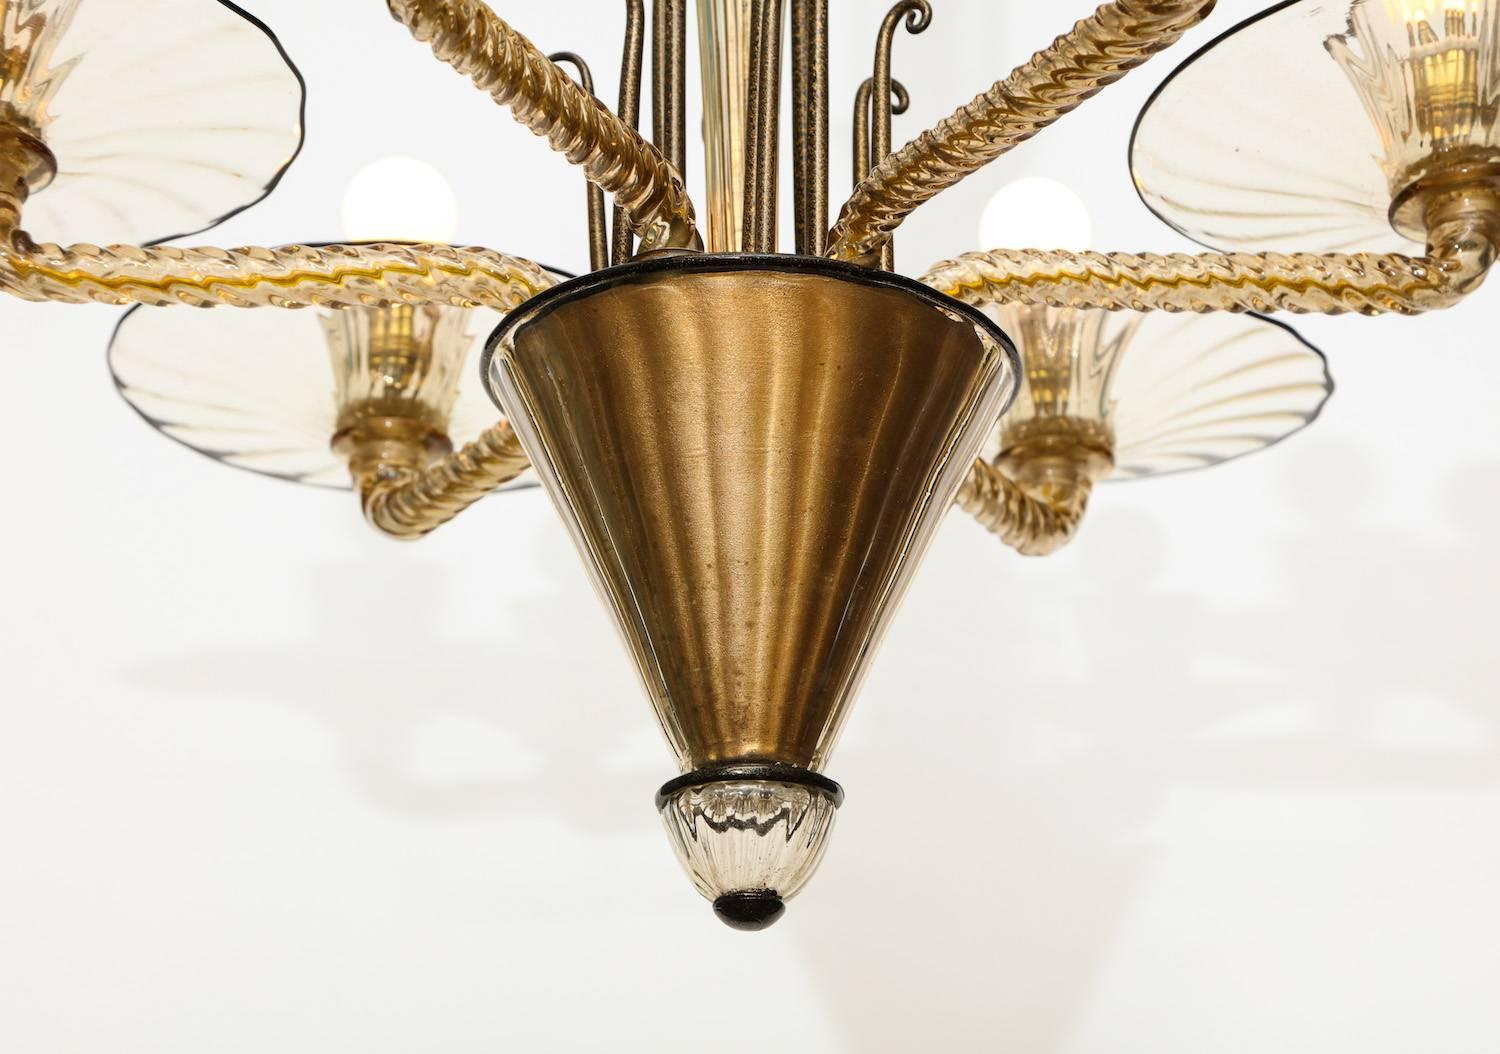 Salviati rare and early six-light chandelier with gilded cups, and gold interior flecks. Twisted and ribbed glass with black trim and black and gold glass detailing. A very fine example of Italian Art Deco realized in Murano glass. Each arm has one